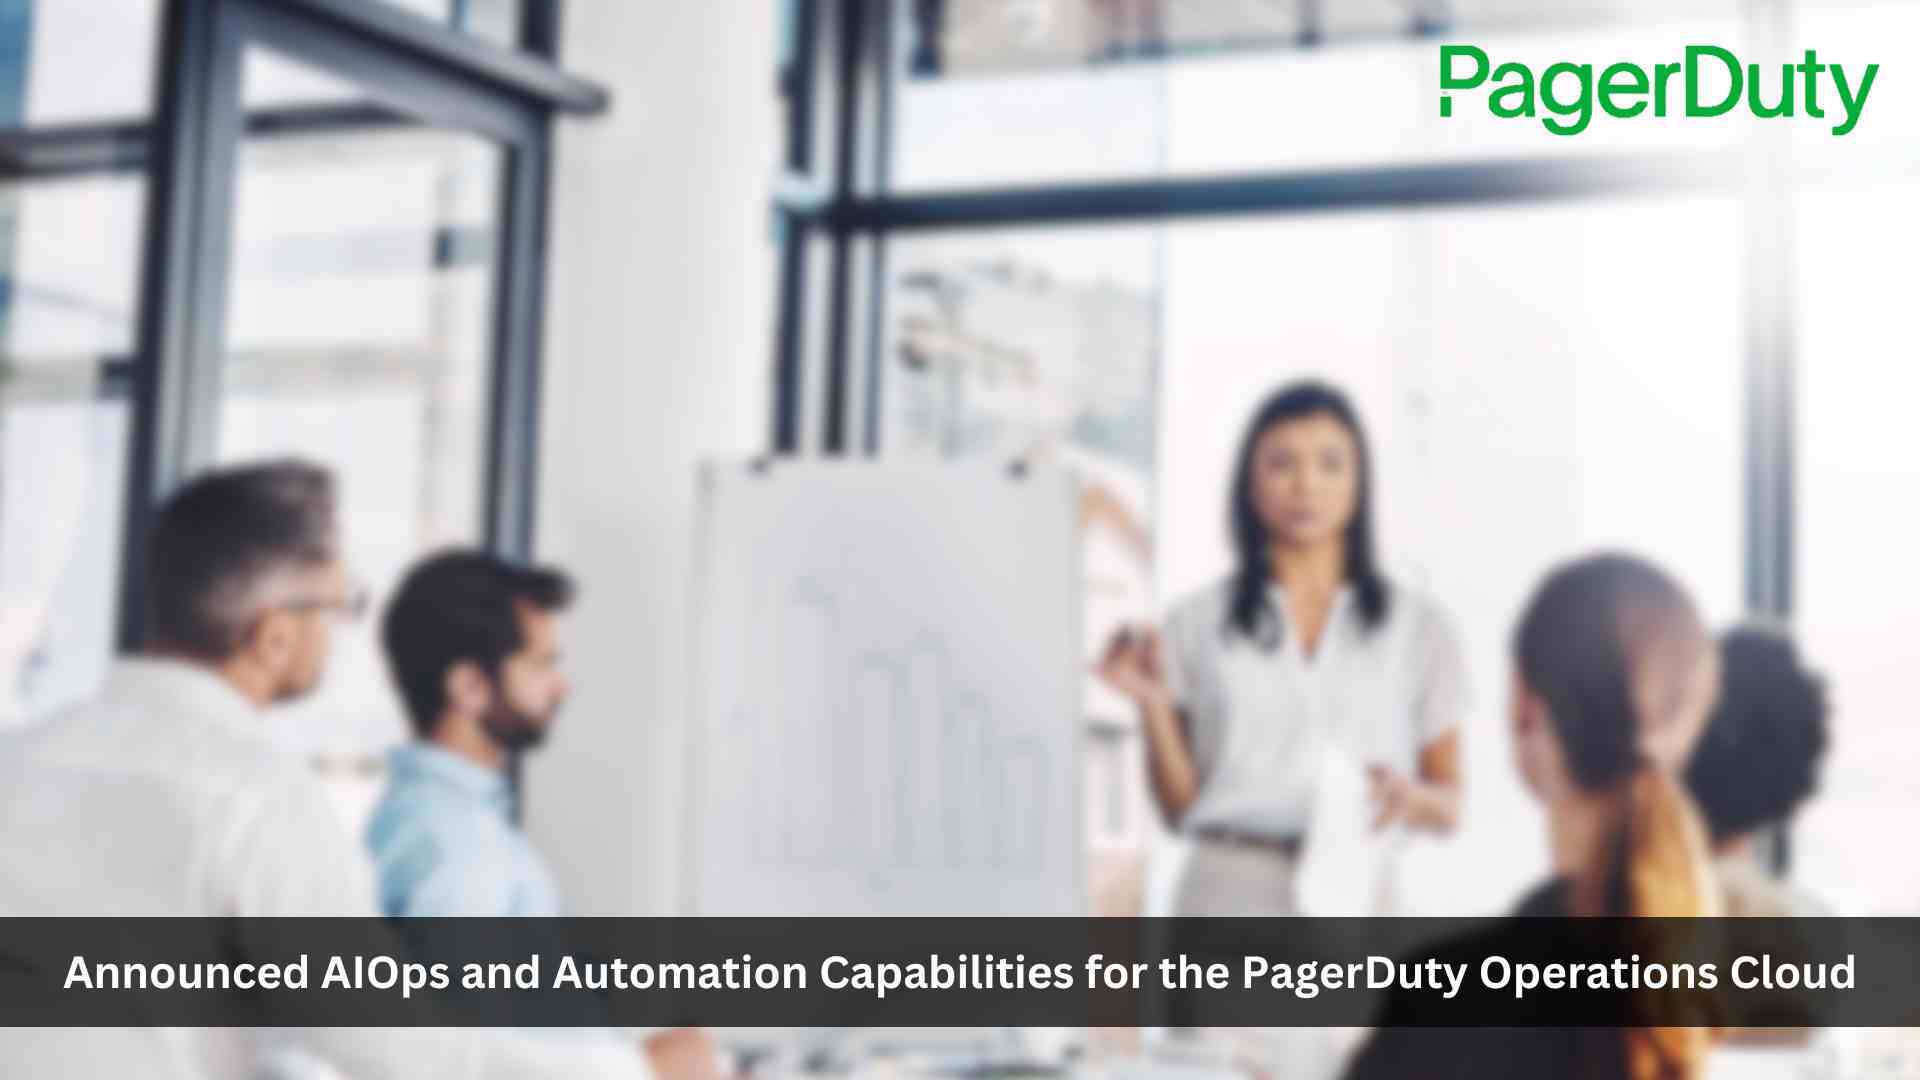 PagerDuty Operations Cloud Enables Customers to Drive Operational Transformation Through Intelligent Automation and Generative AI